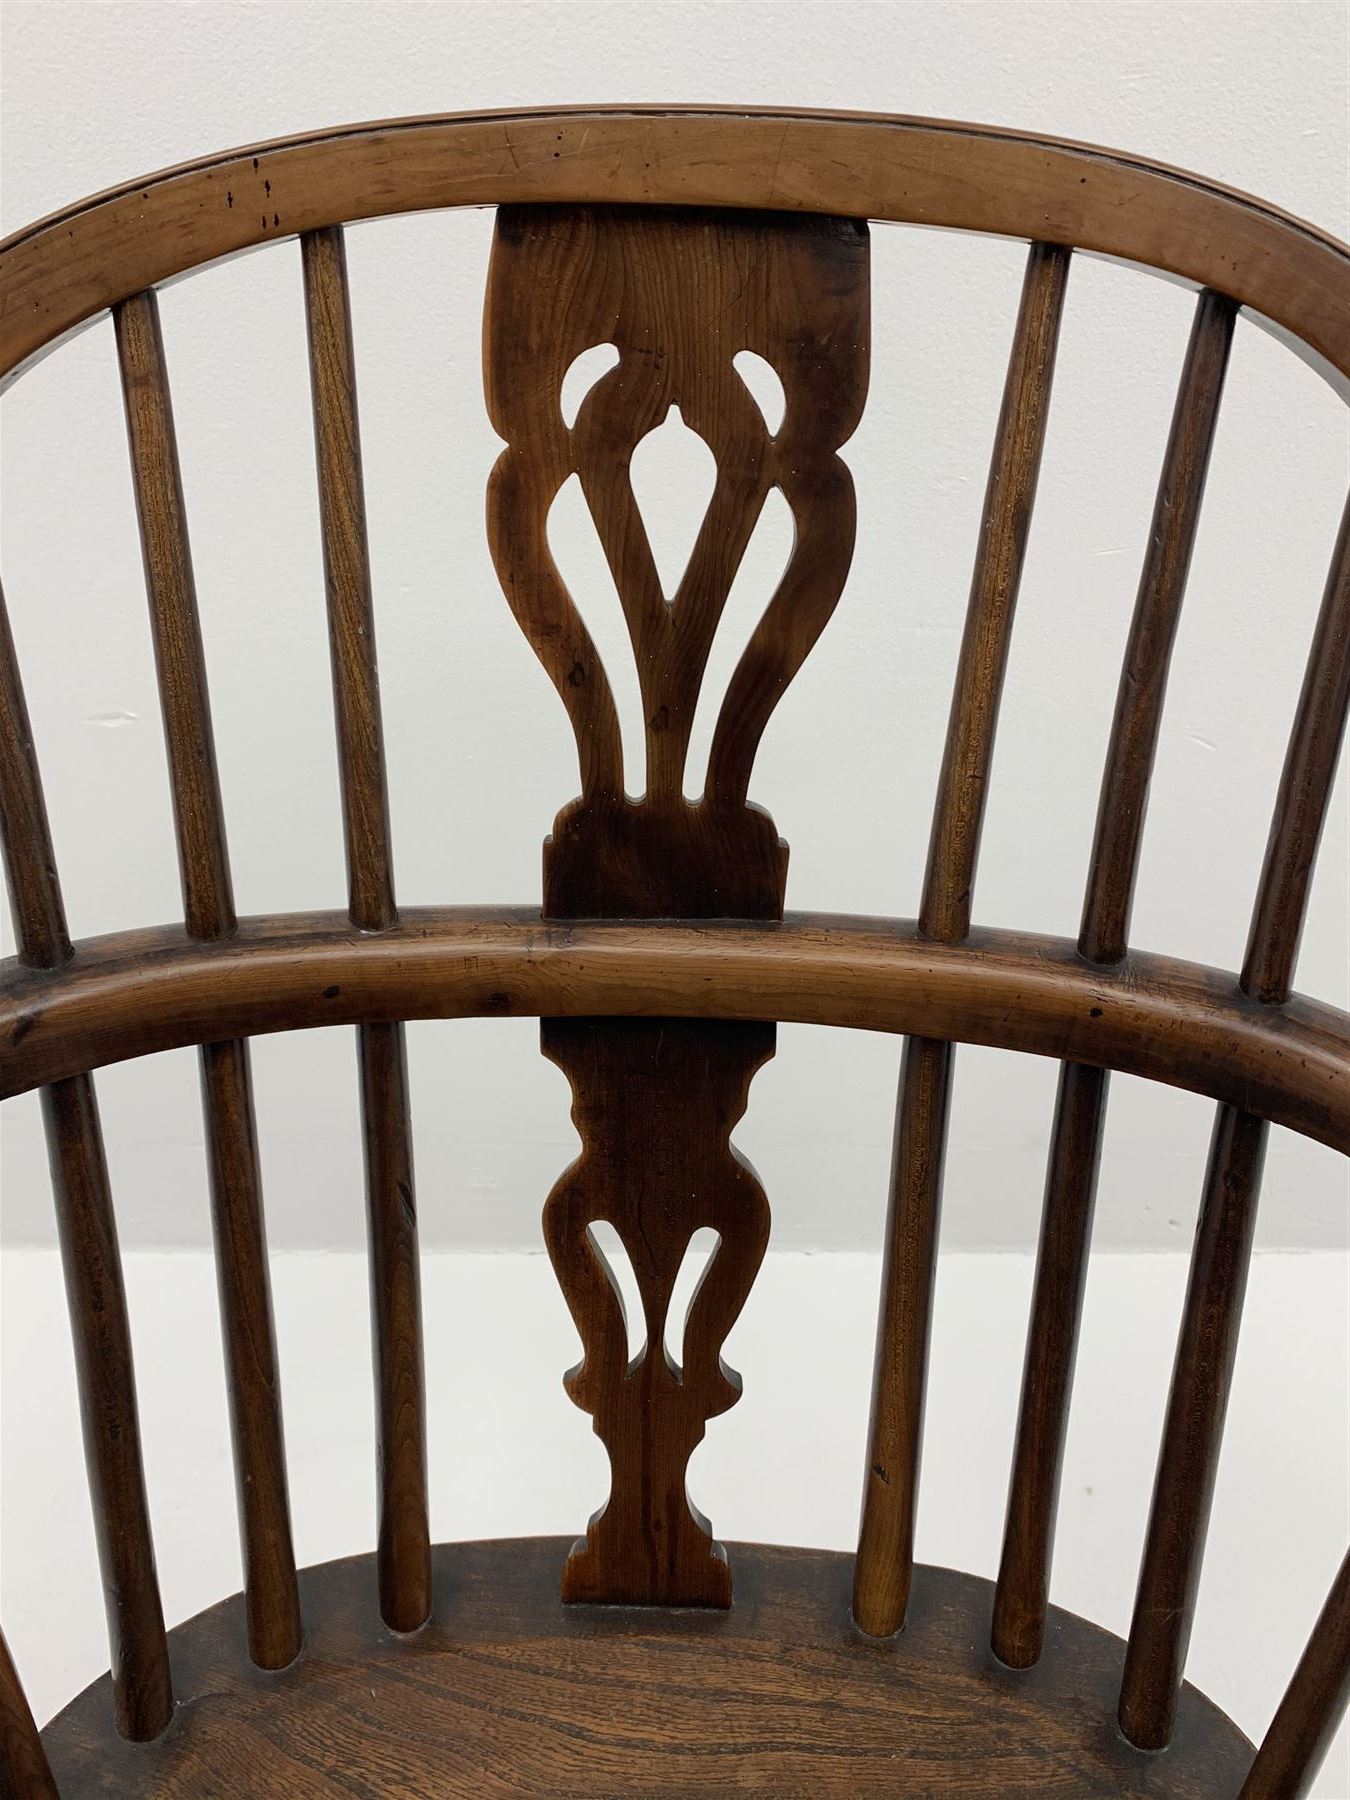 Early 19th century yew wood and elm Windsor armchair - Image 5 of 8